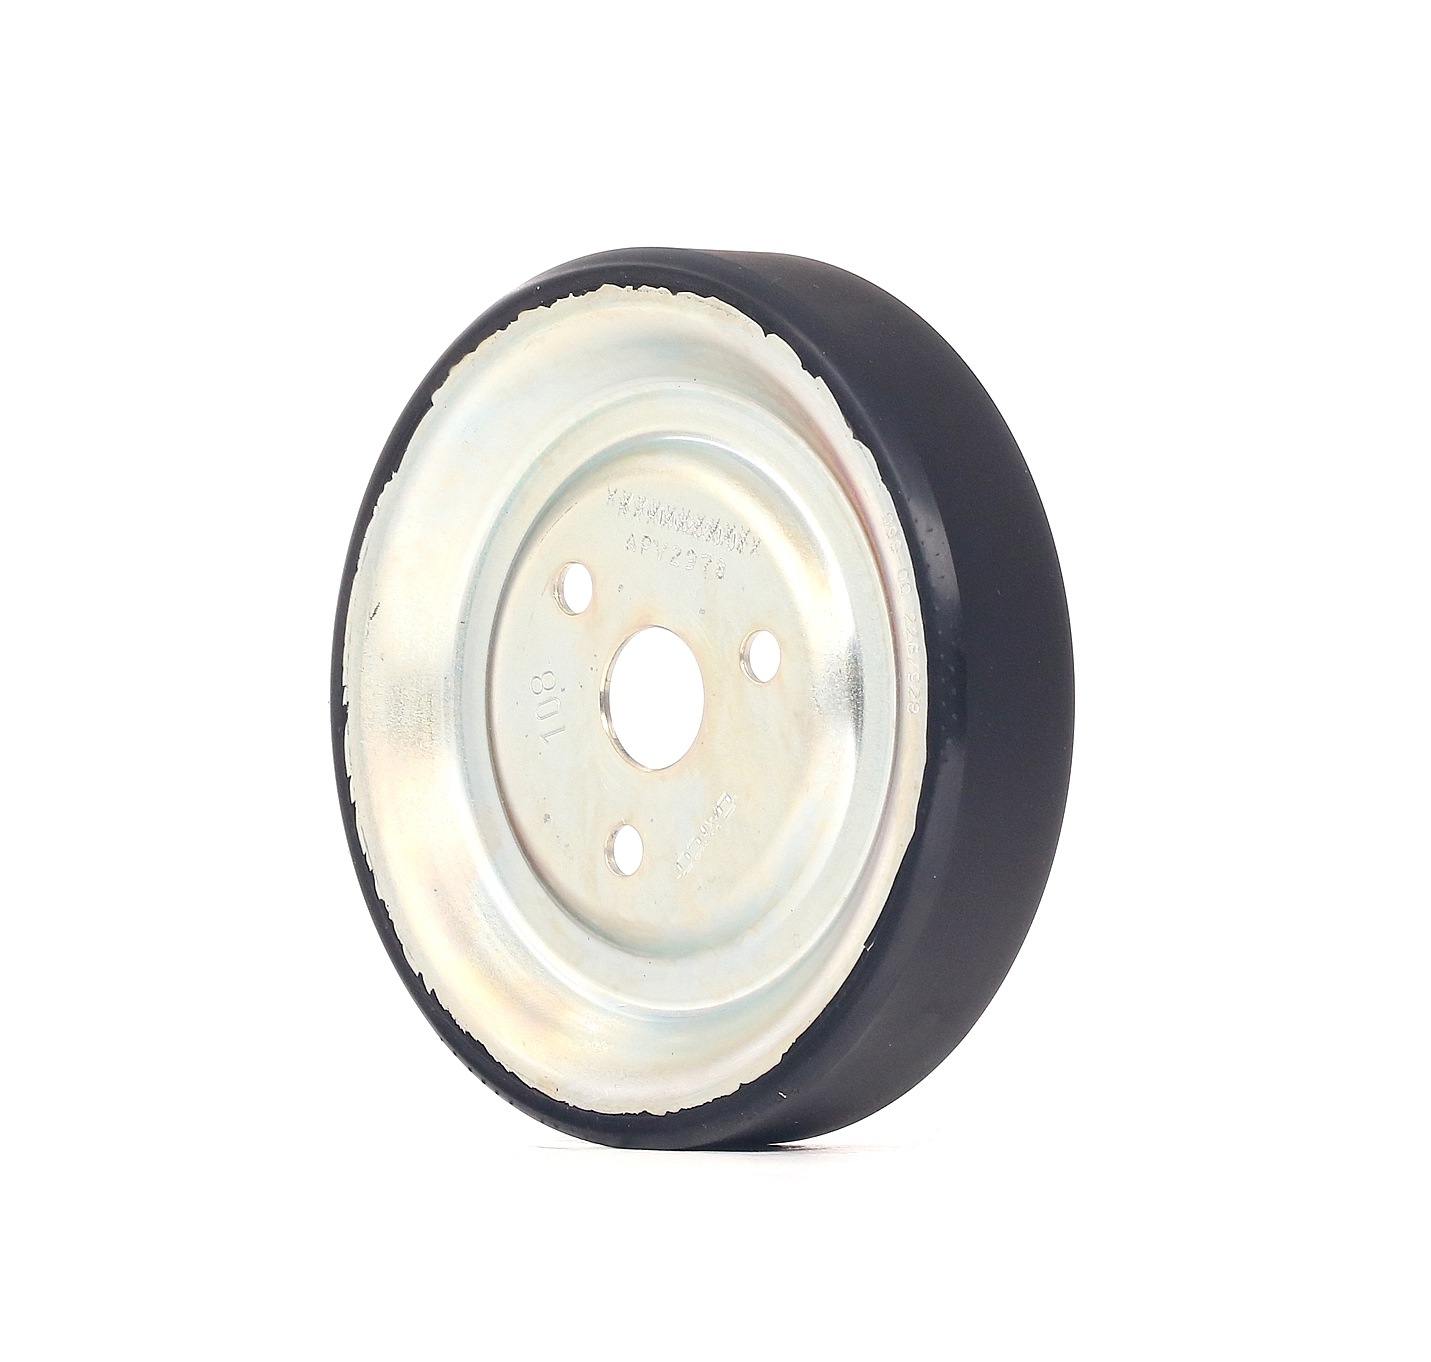 Peugeot Water pump pulley INA 532 0912 10 at a good price